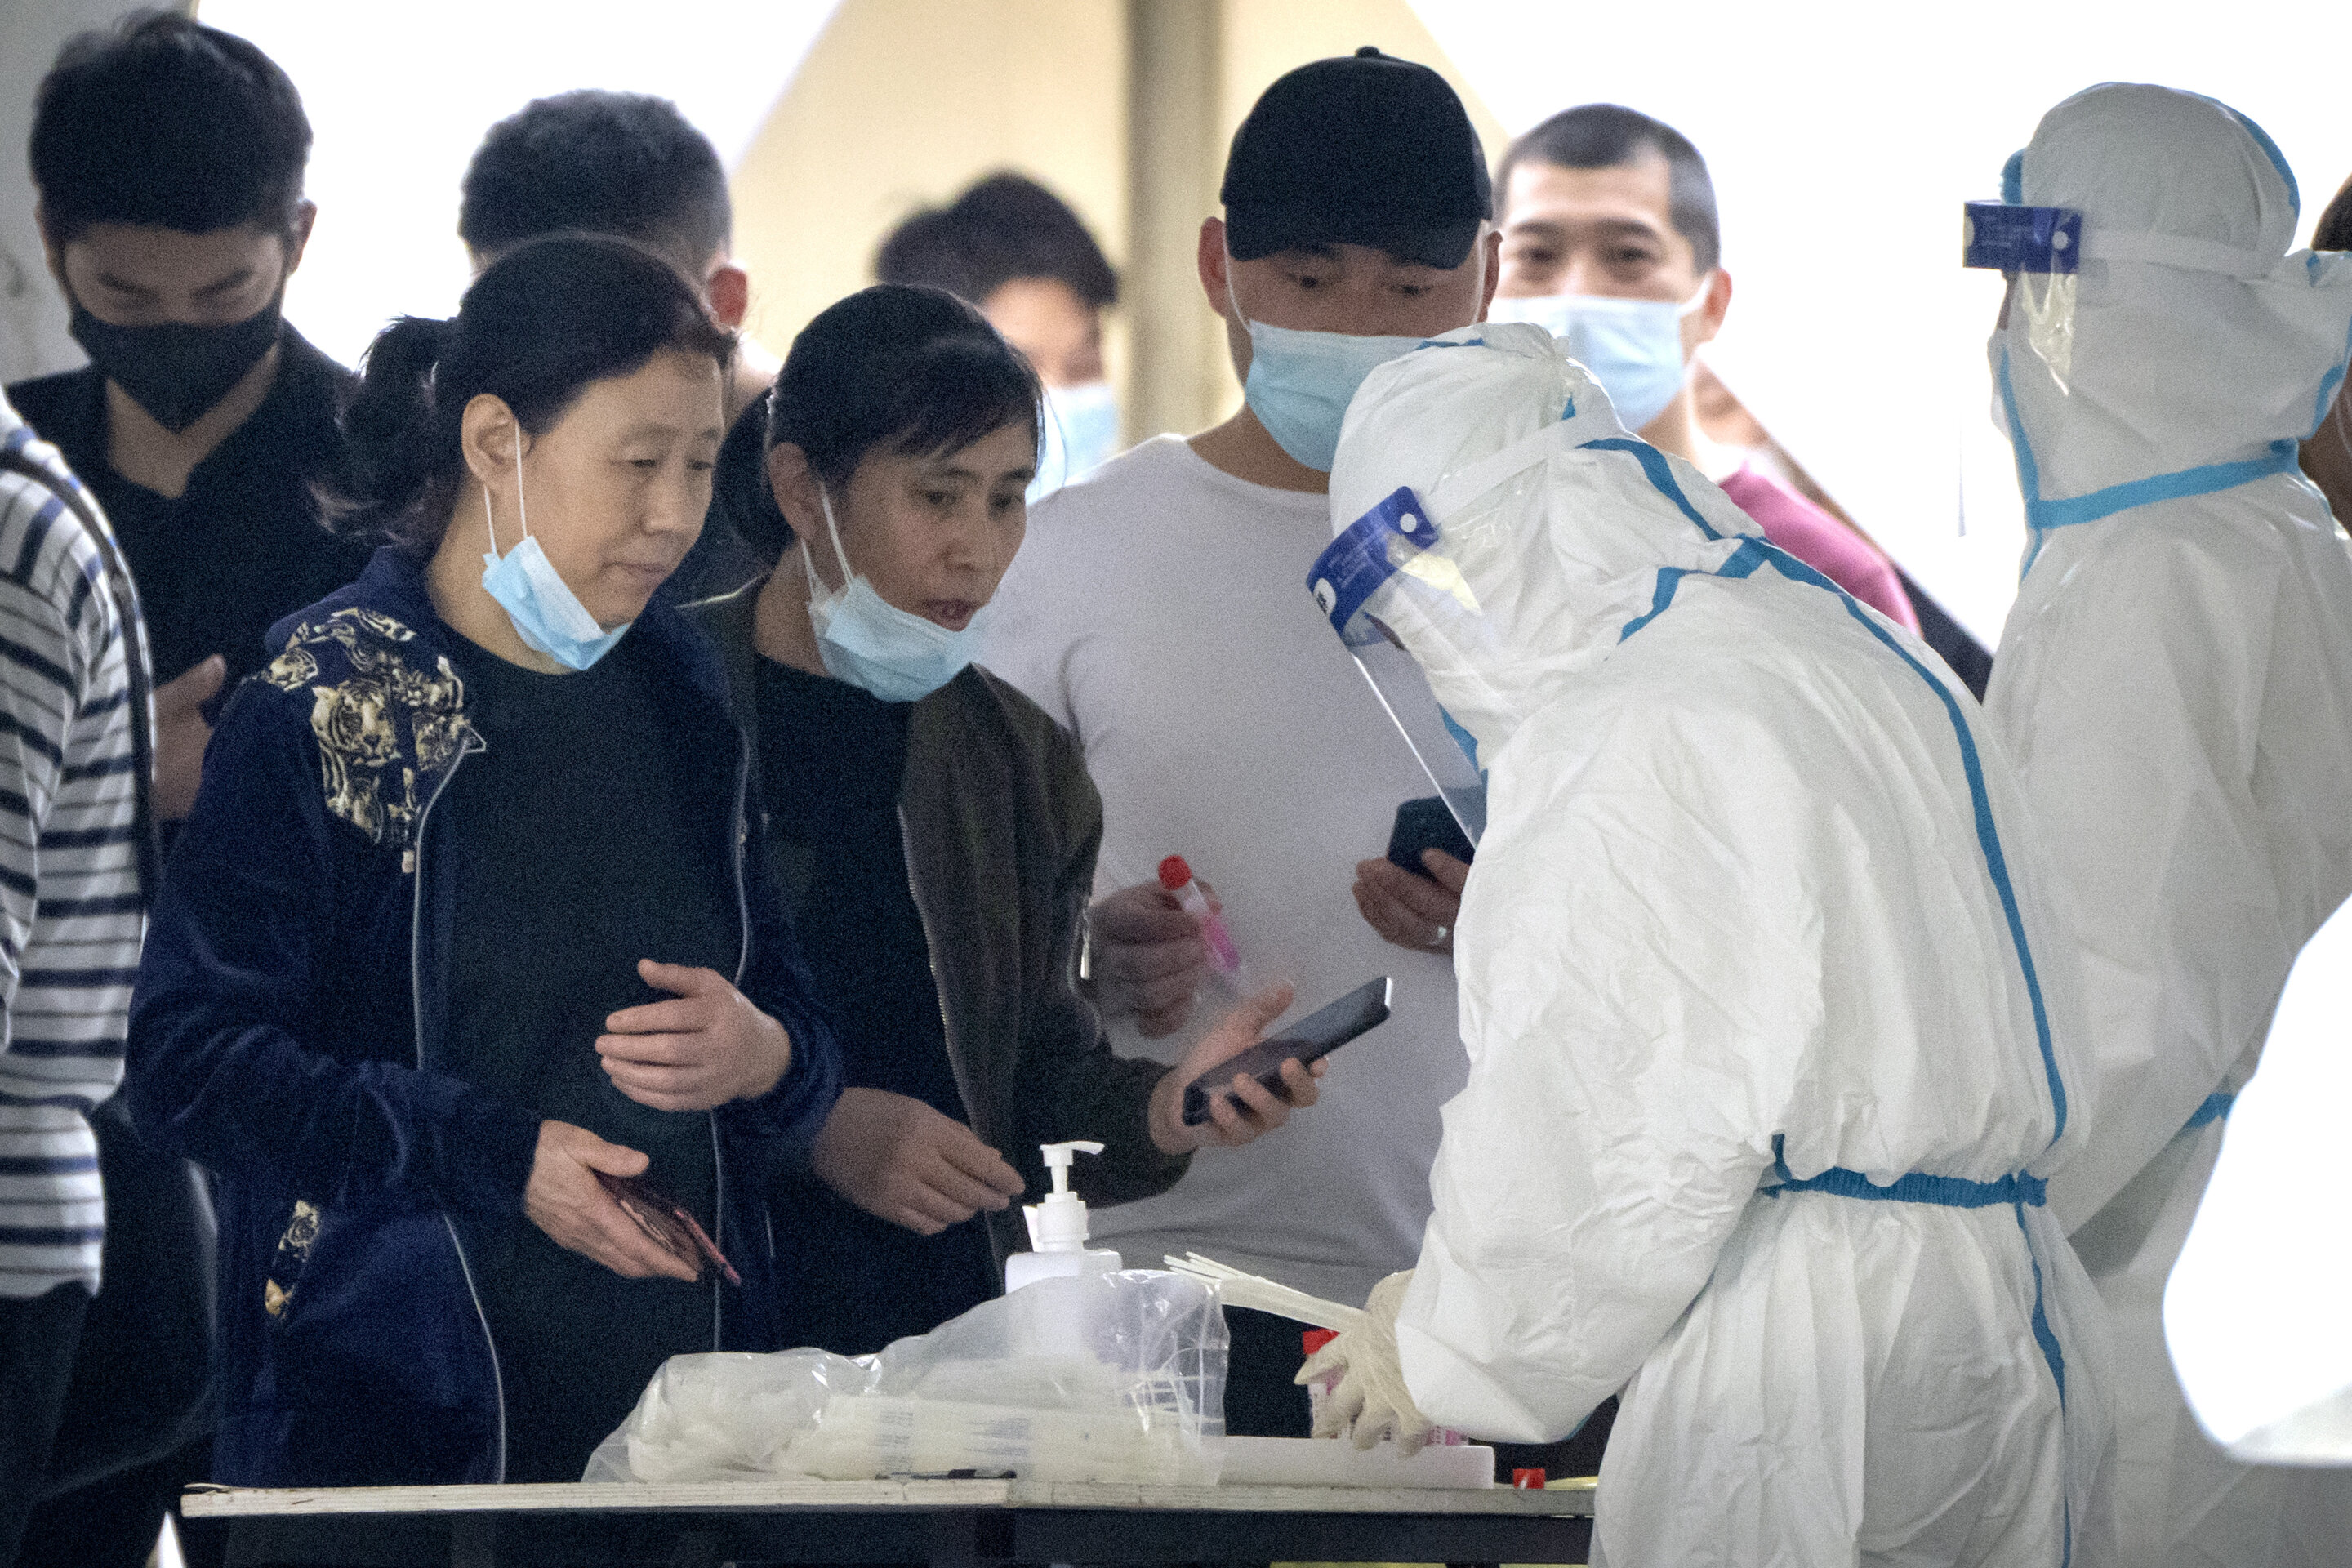 #Beijing on alert after COVID-19 cases discovered in school